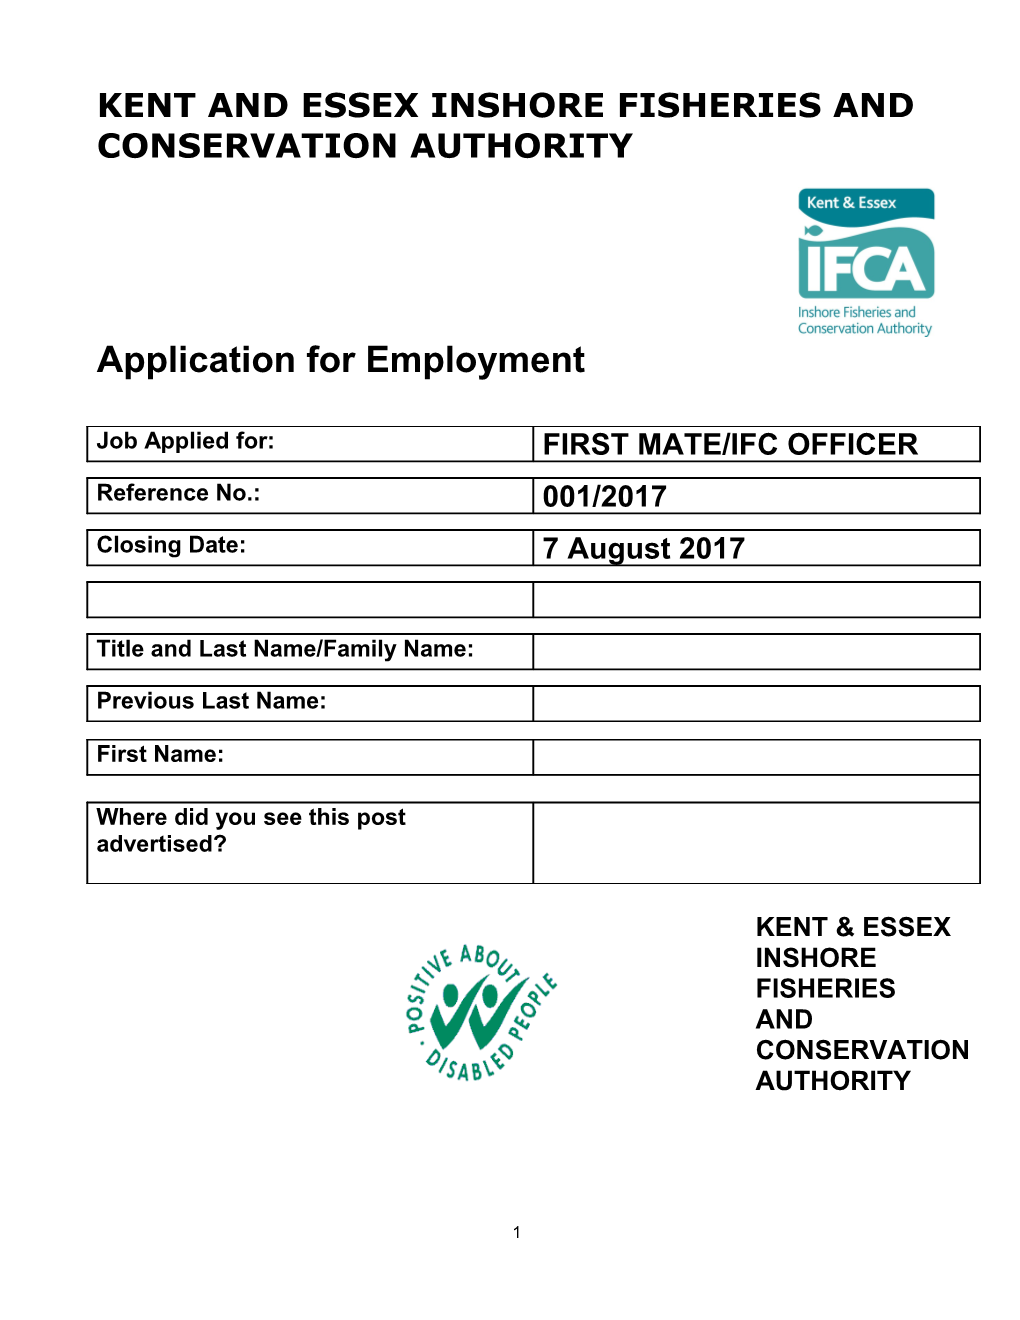 Kent and Essex Inshore Fisheries and Conservation Authority